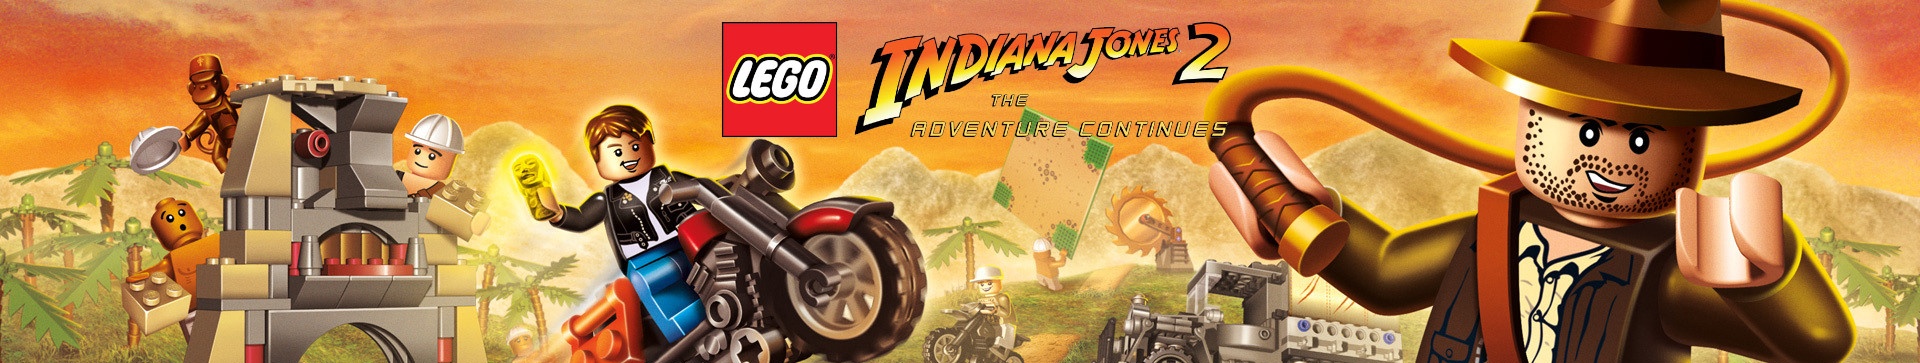 lego-indiana-jones-2-the-adventure-continues-banner-1920x363